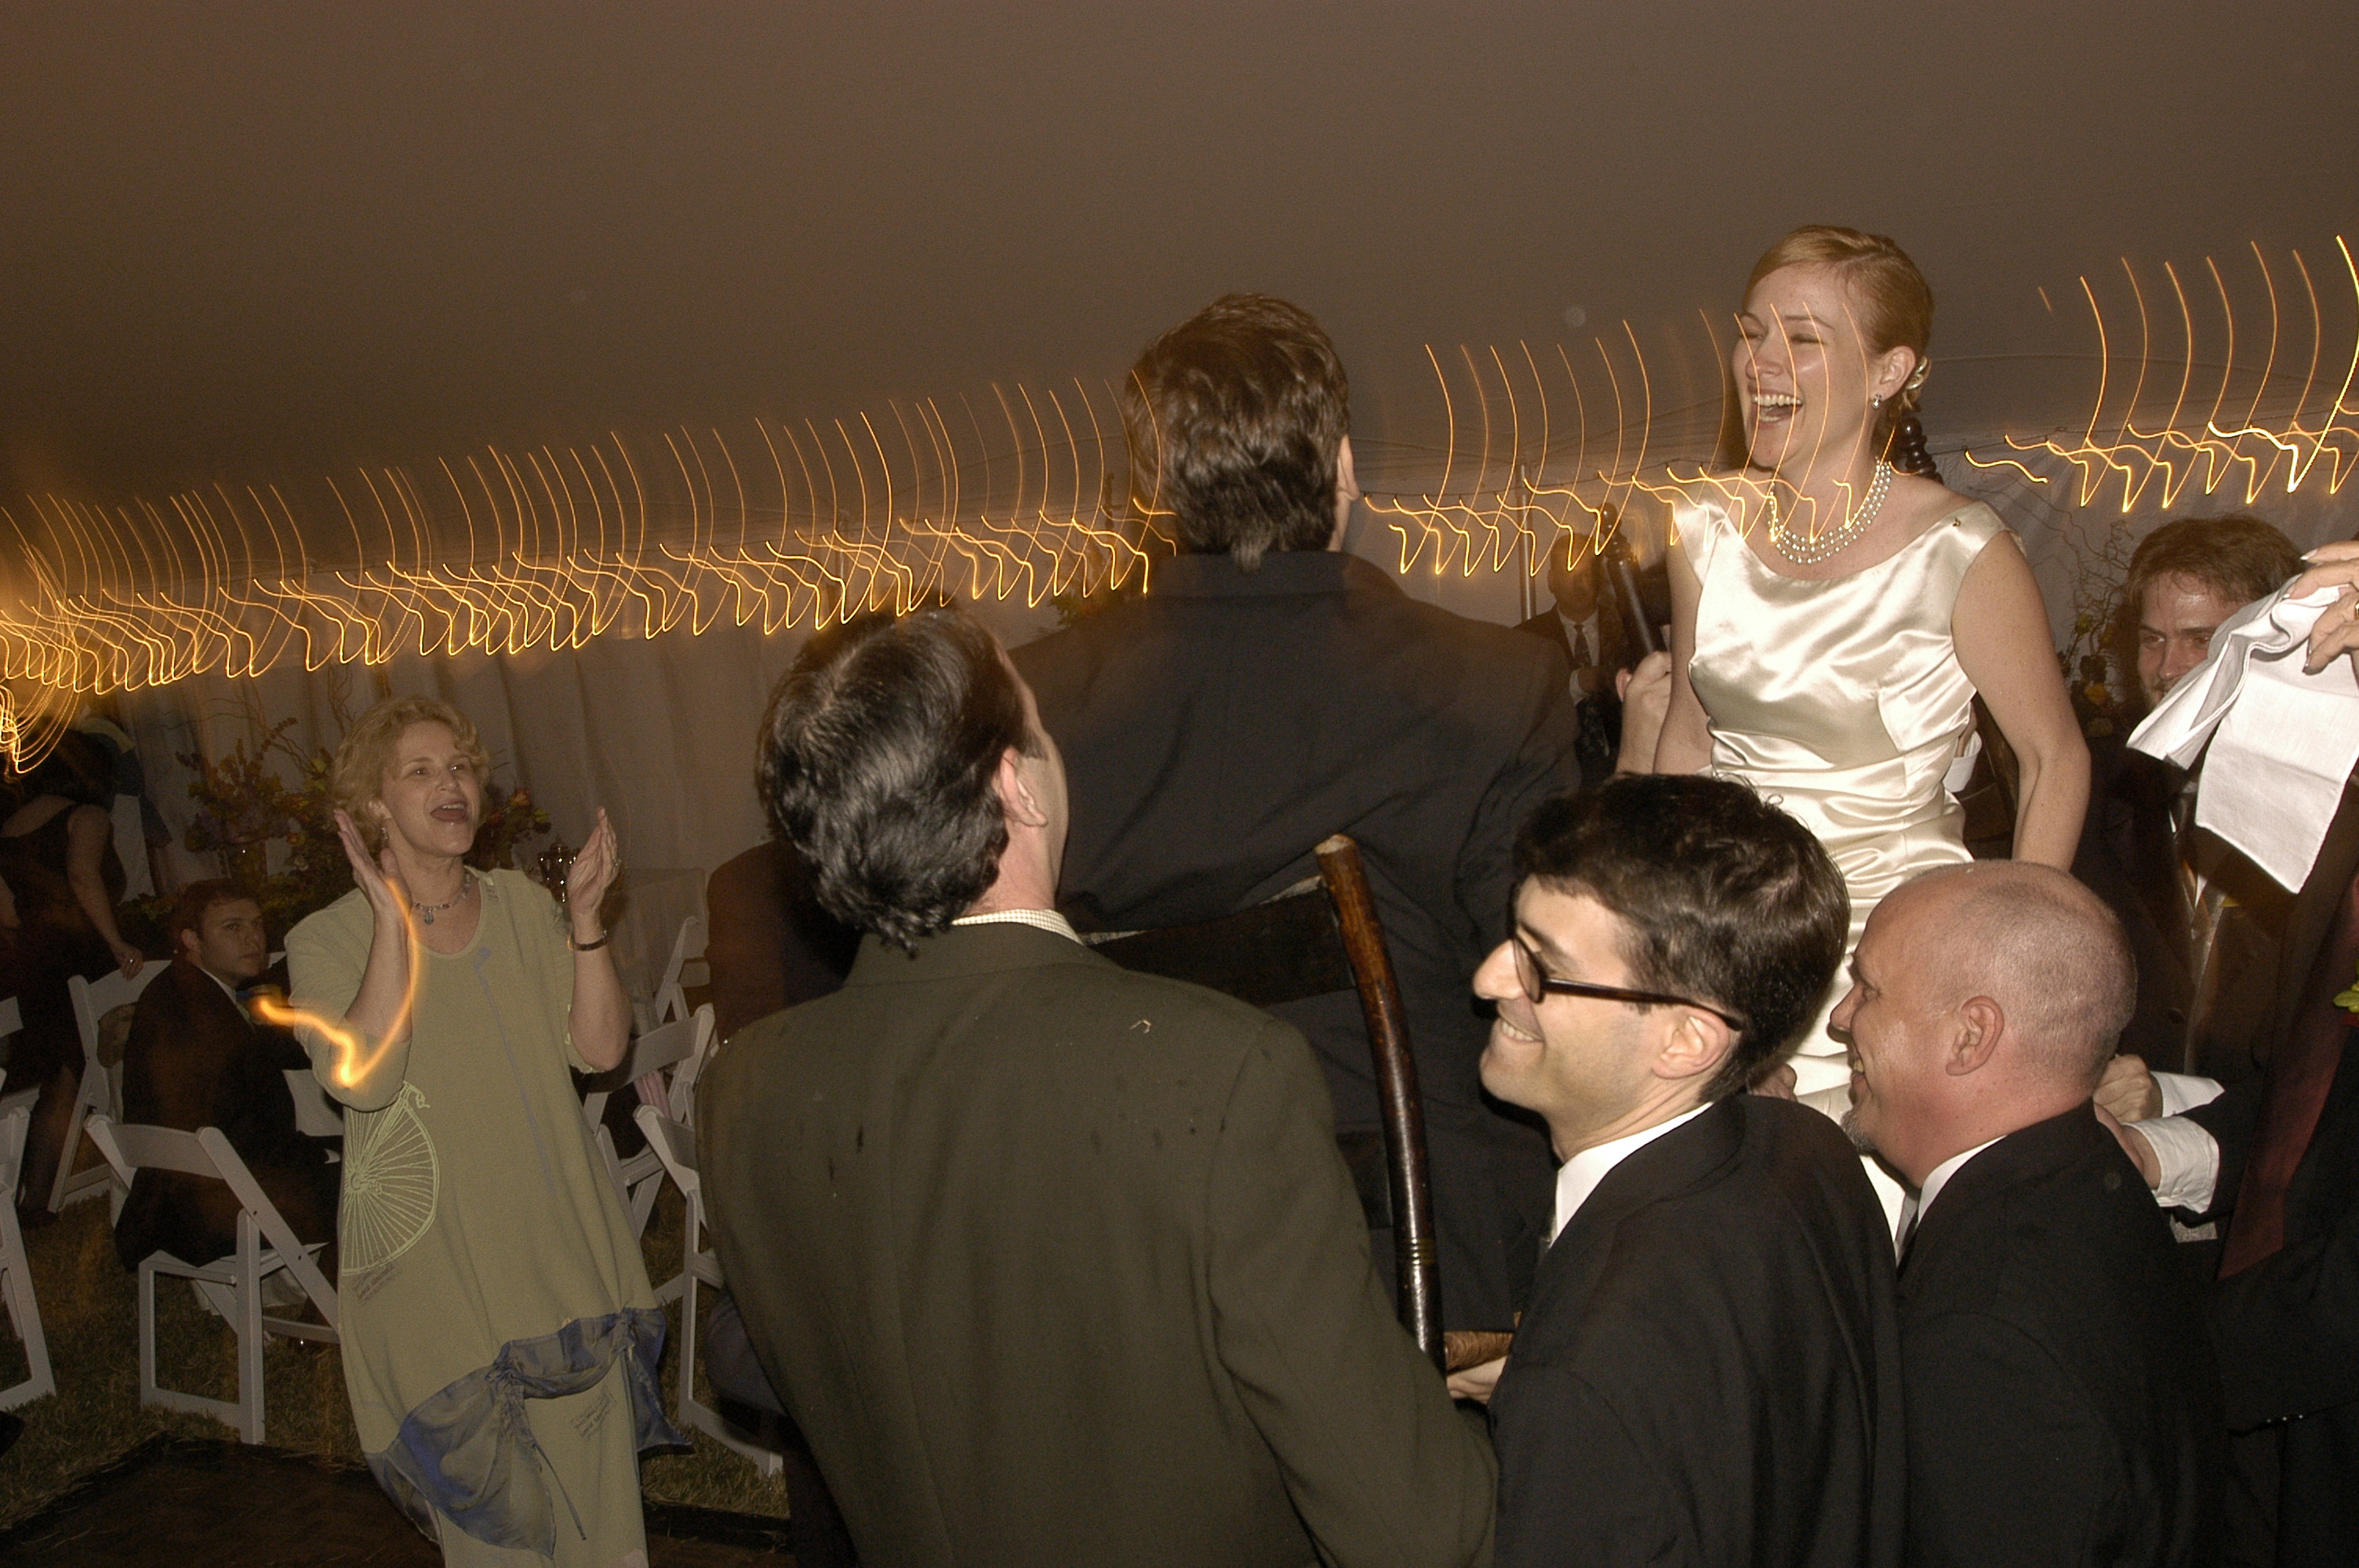 Art and Mallory's wedding, October 11, 2003.